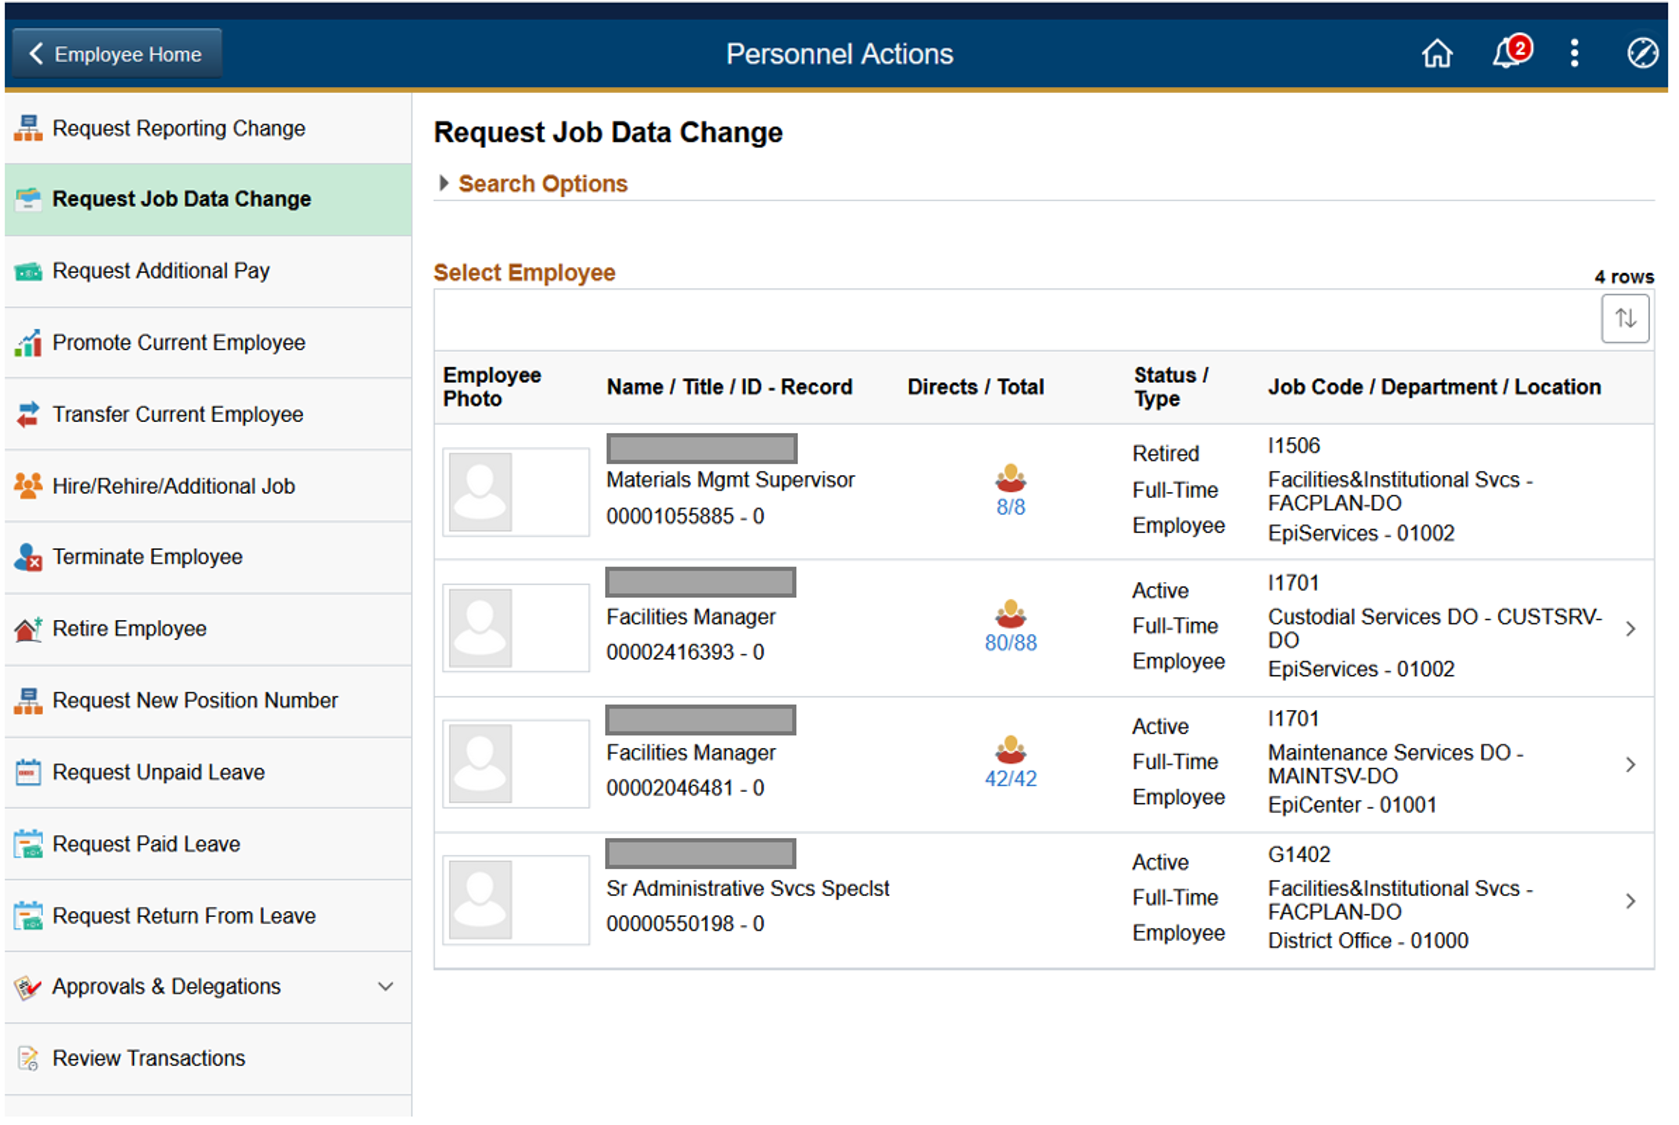 Guided Self-Service for Managers labeled Personnel Actions, showing both delivered and custom transactions